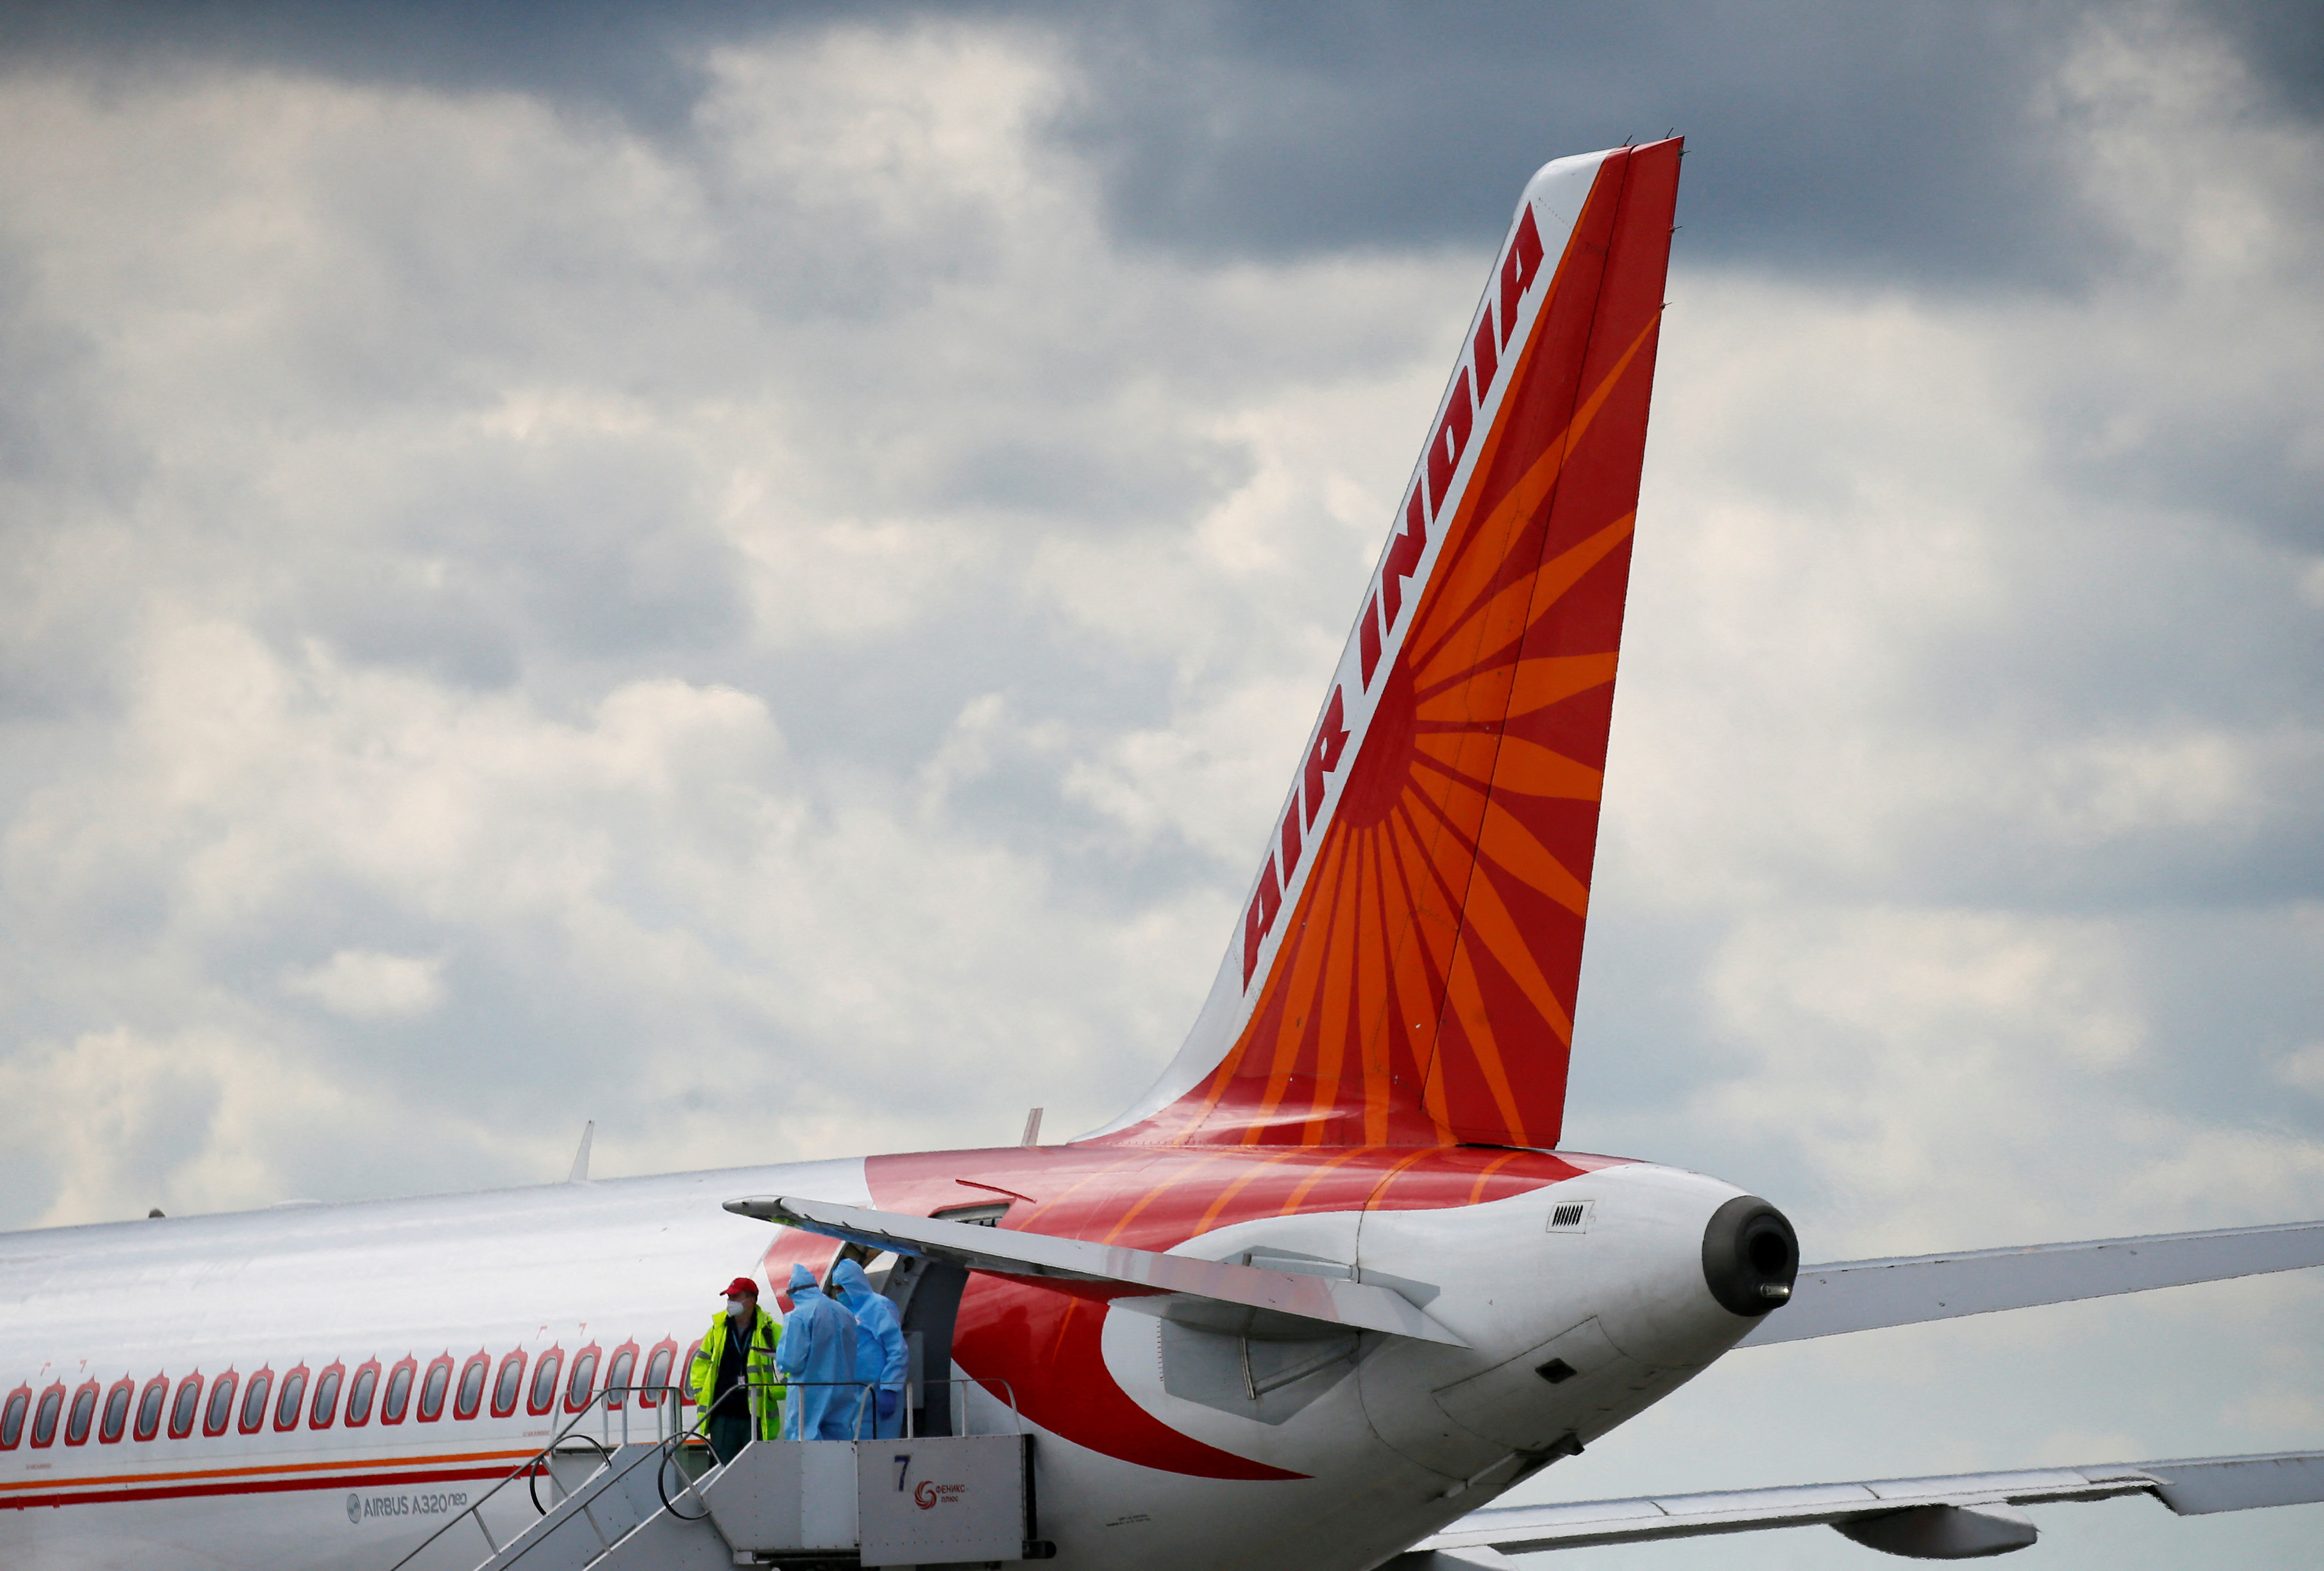 An Air India Airbus A320 plane is seen at the Boryspil International Airport outside Kiev